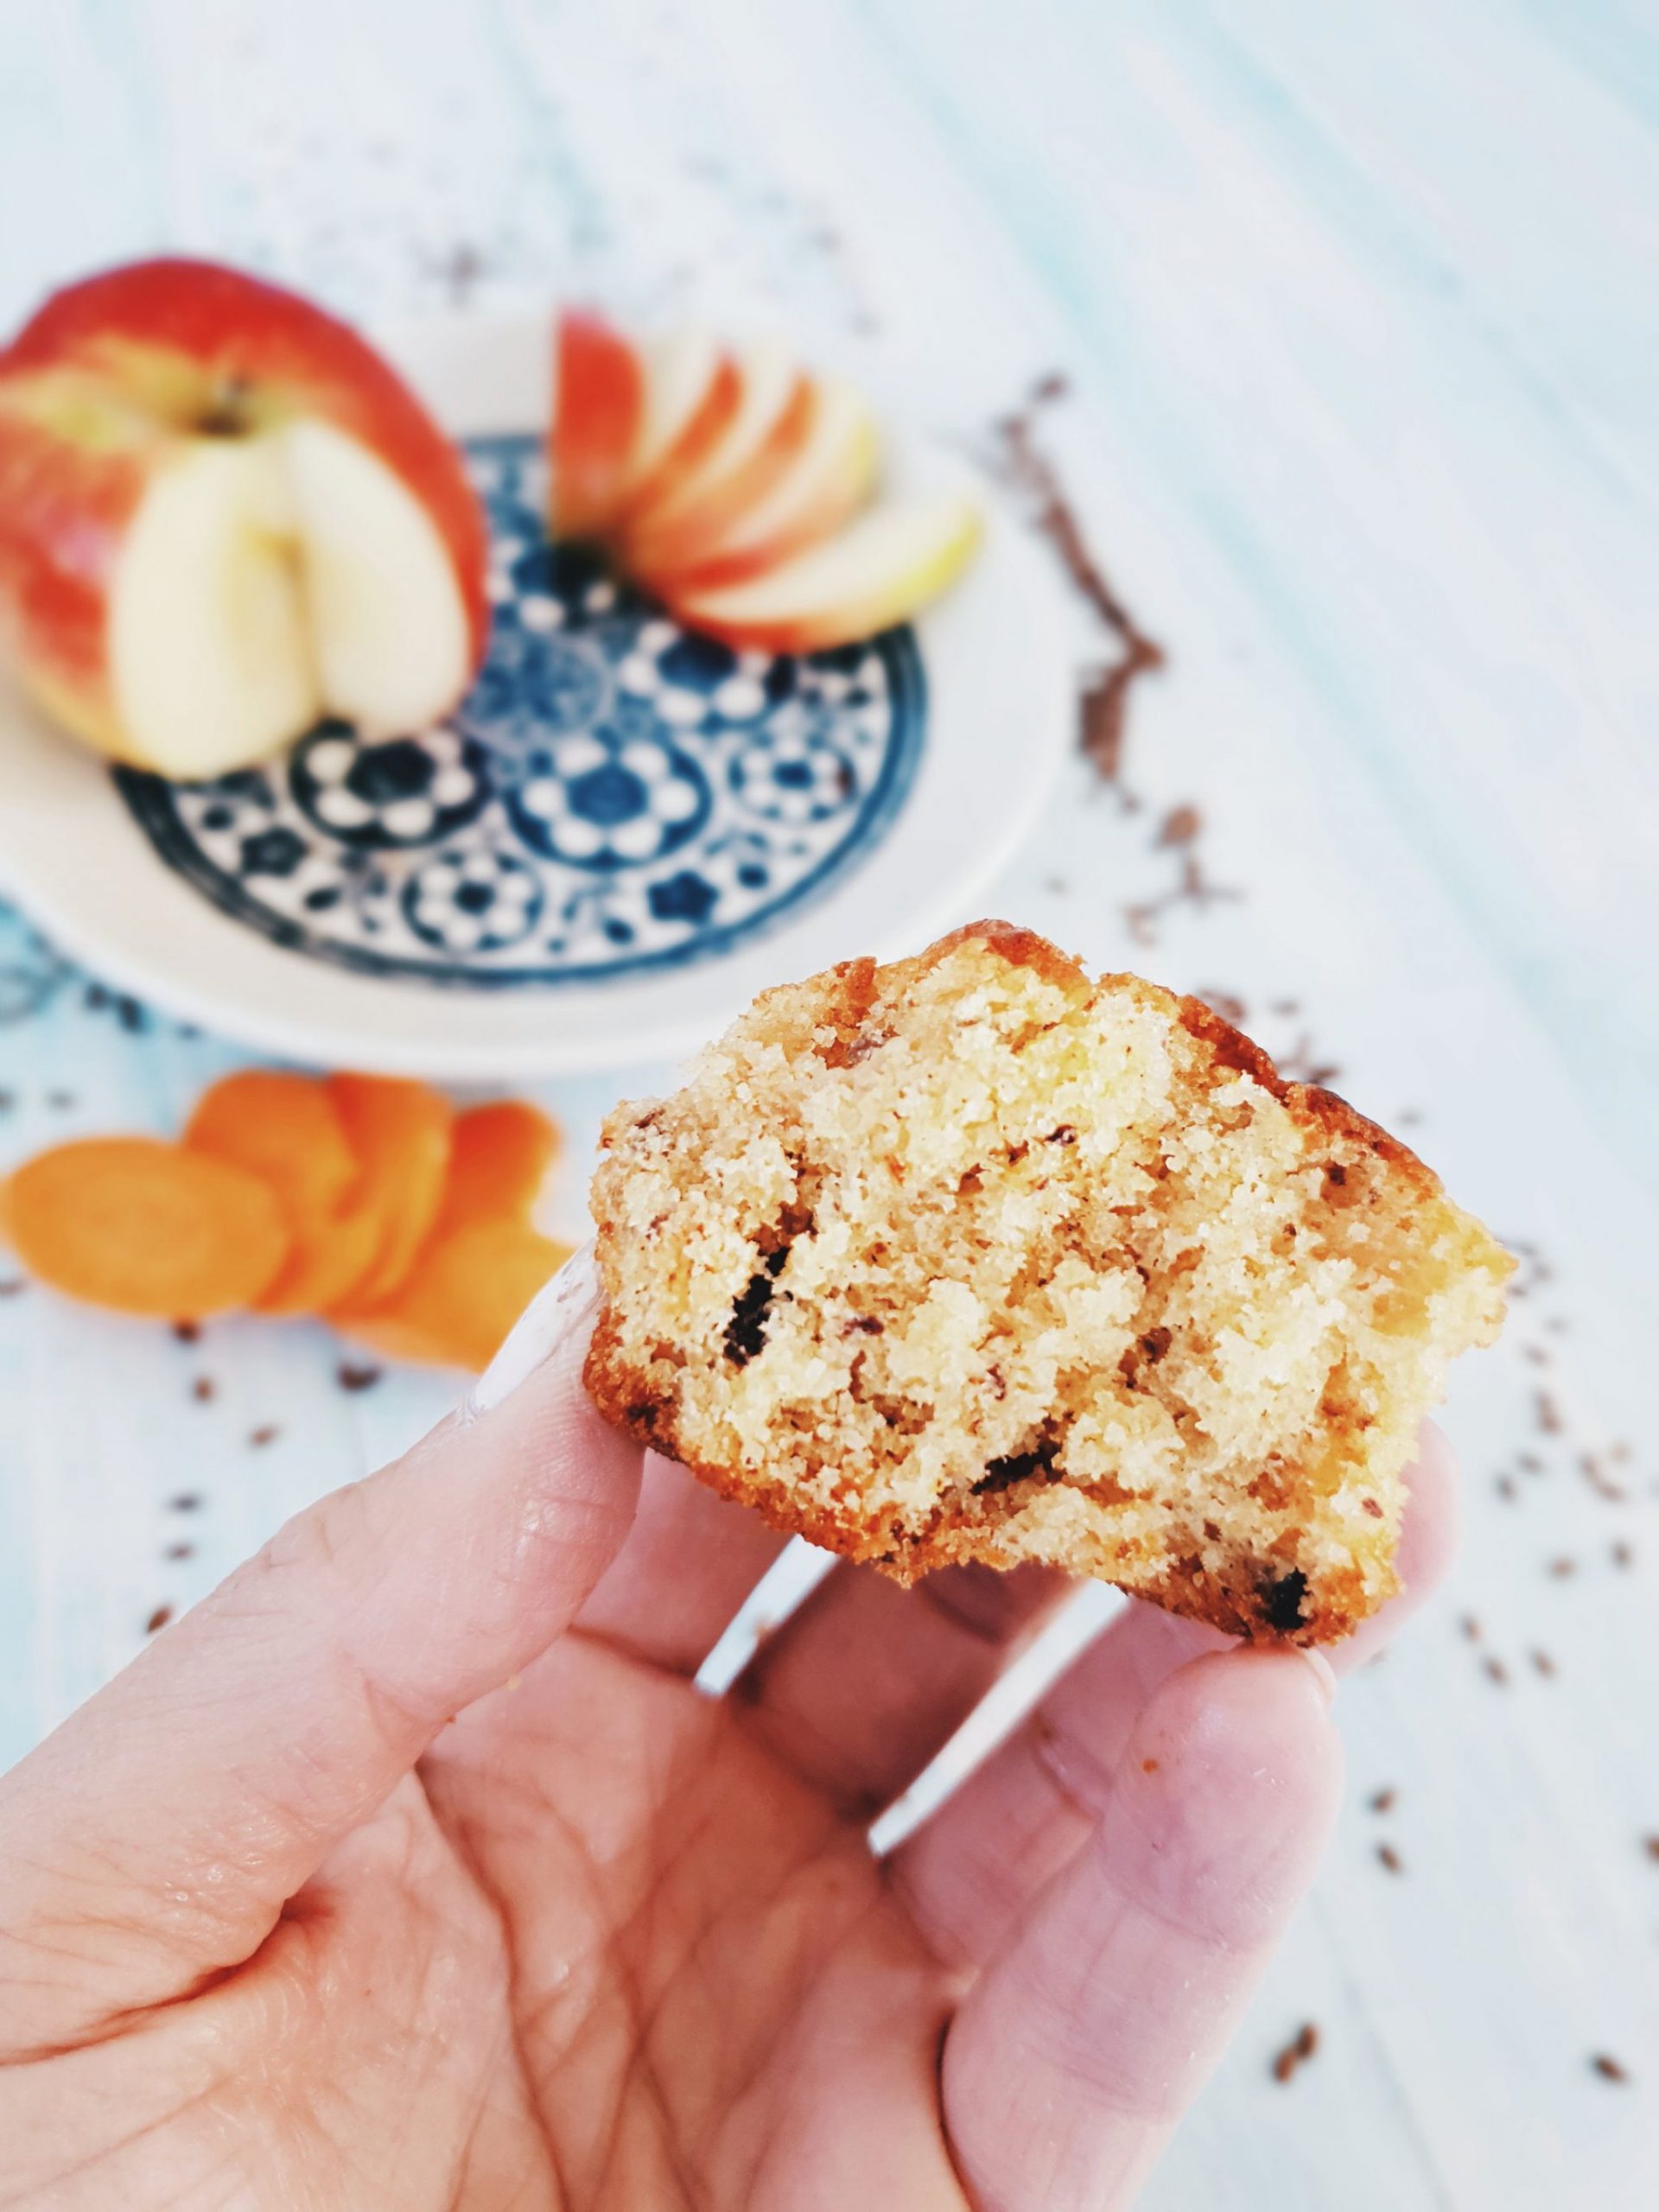 Delicious Carrot and Apple Breakfast Muffins